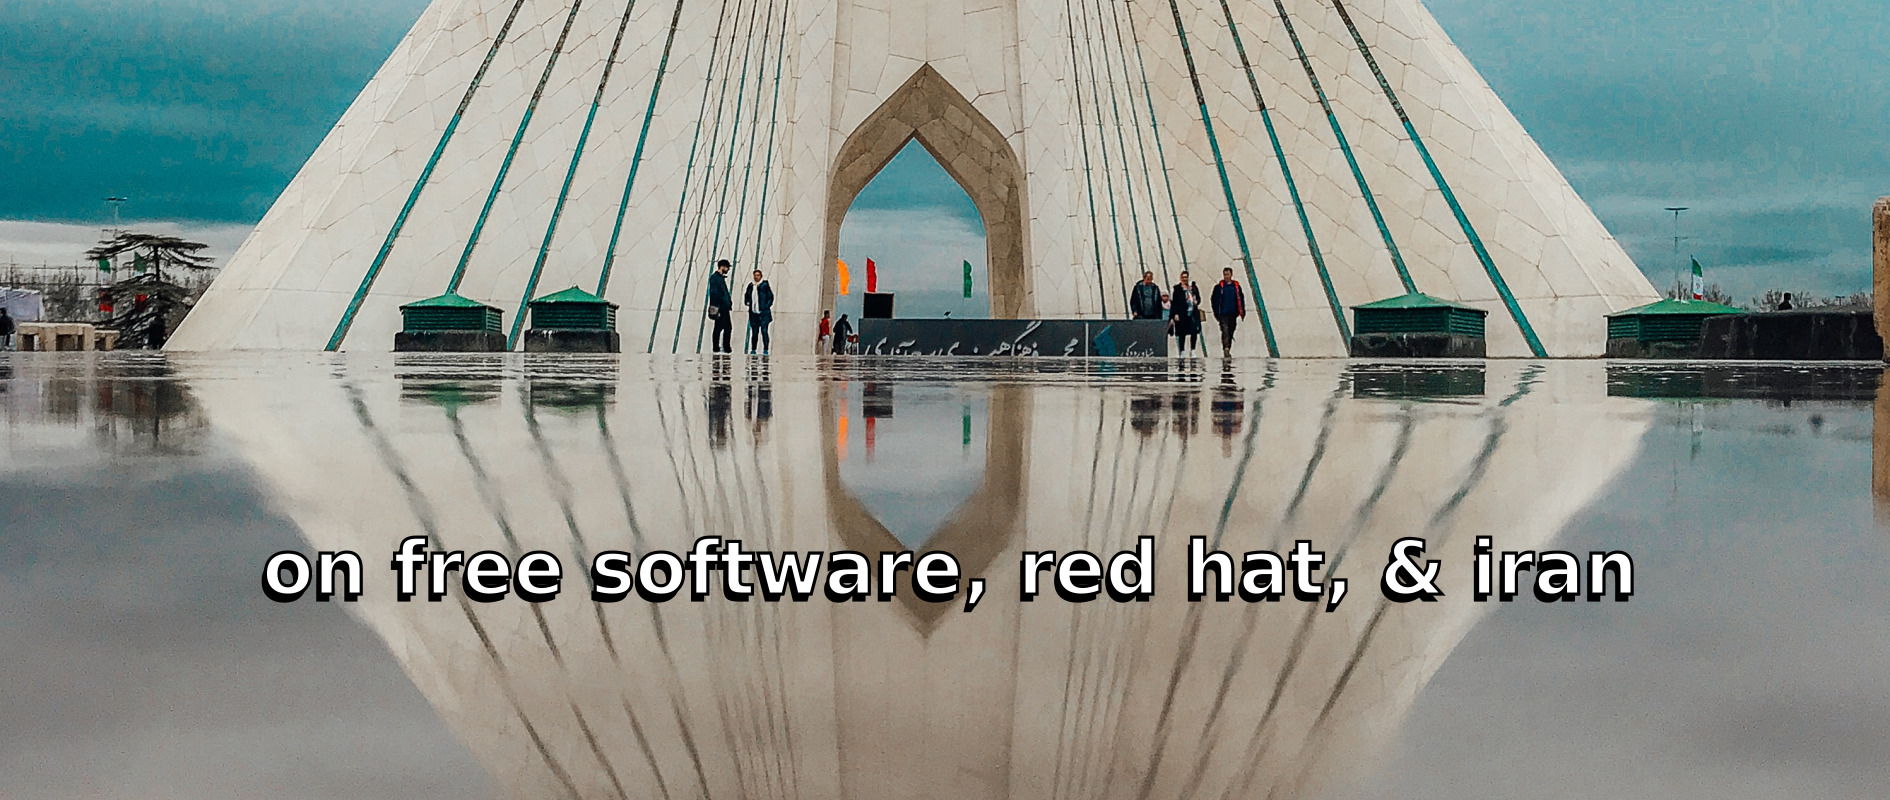 Subtitled, "on Free Software, Red Hat, and Iran". The Azadi Tower in Tehran, Iran appears in the background.